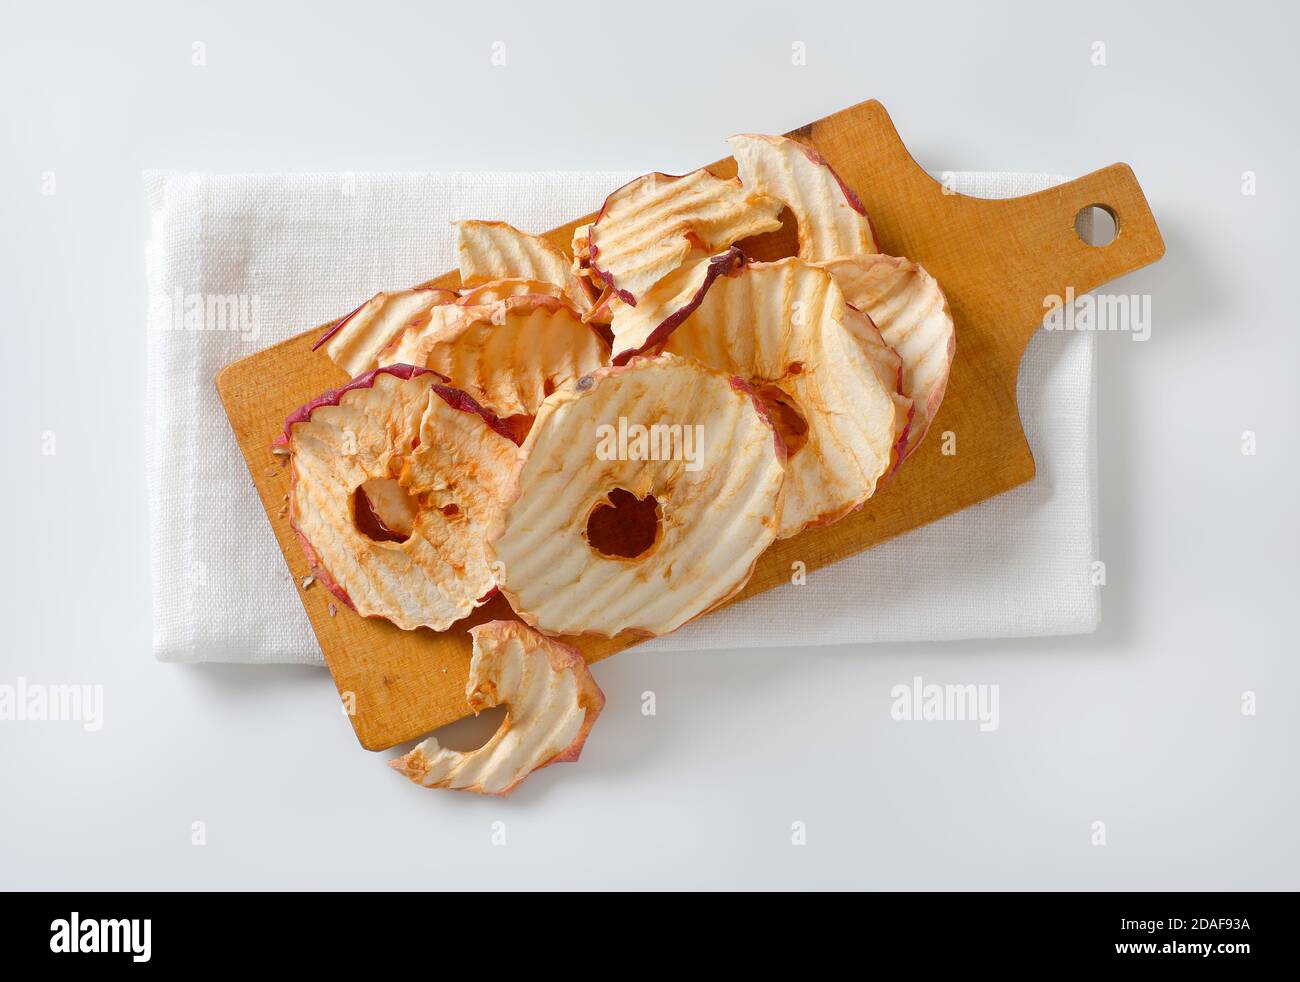 Dried apple chips or rings on cutting board Stock Photo